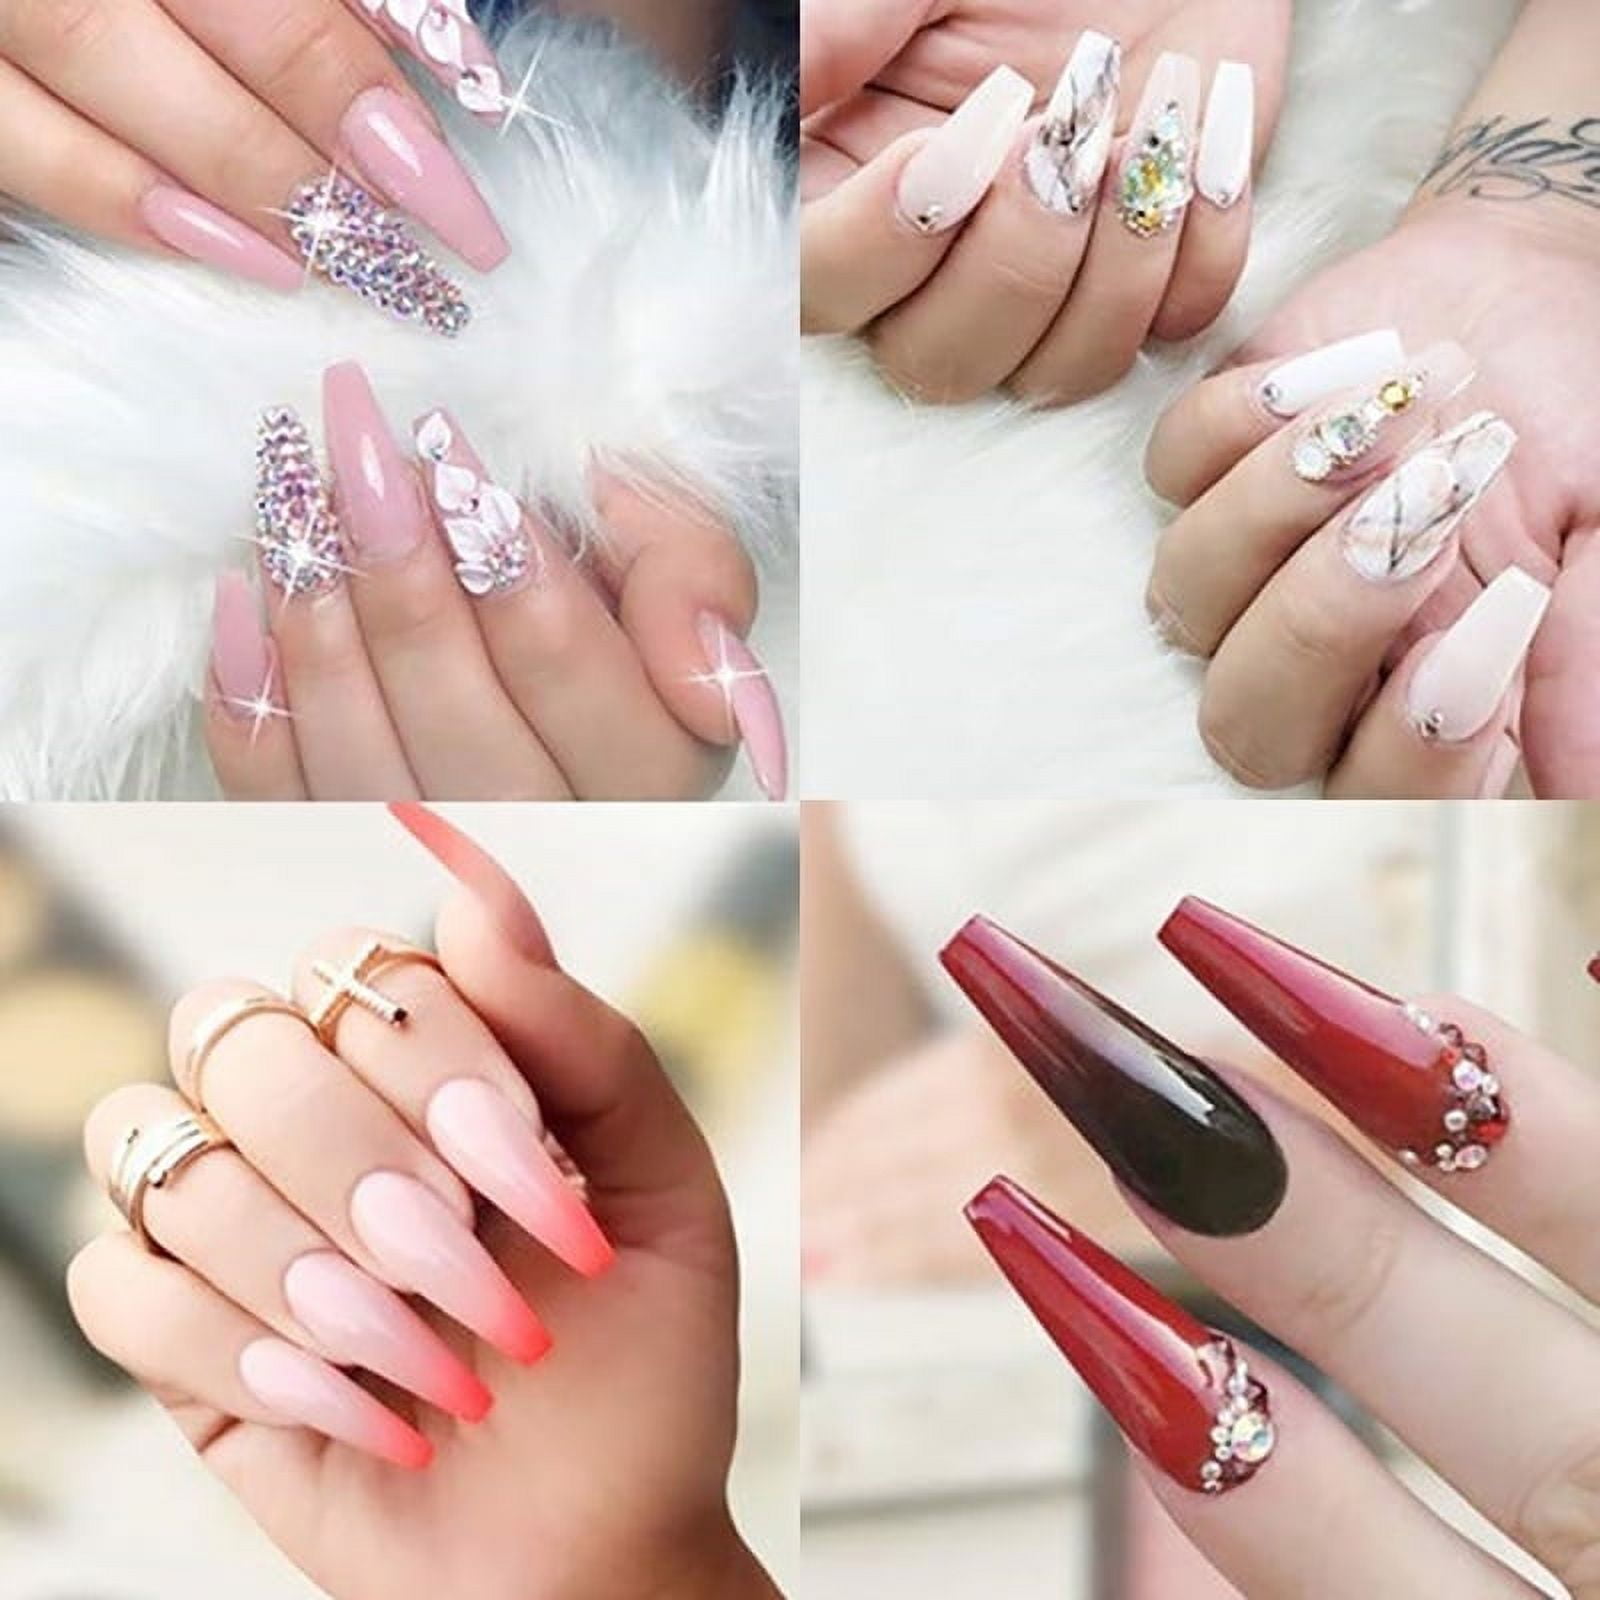 Acrylic Nails Near You in Chicago | Best Places To Get Acrylics in Chicago,  IL